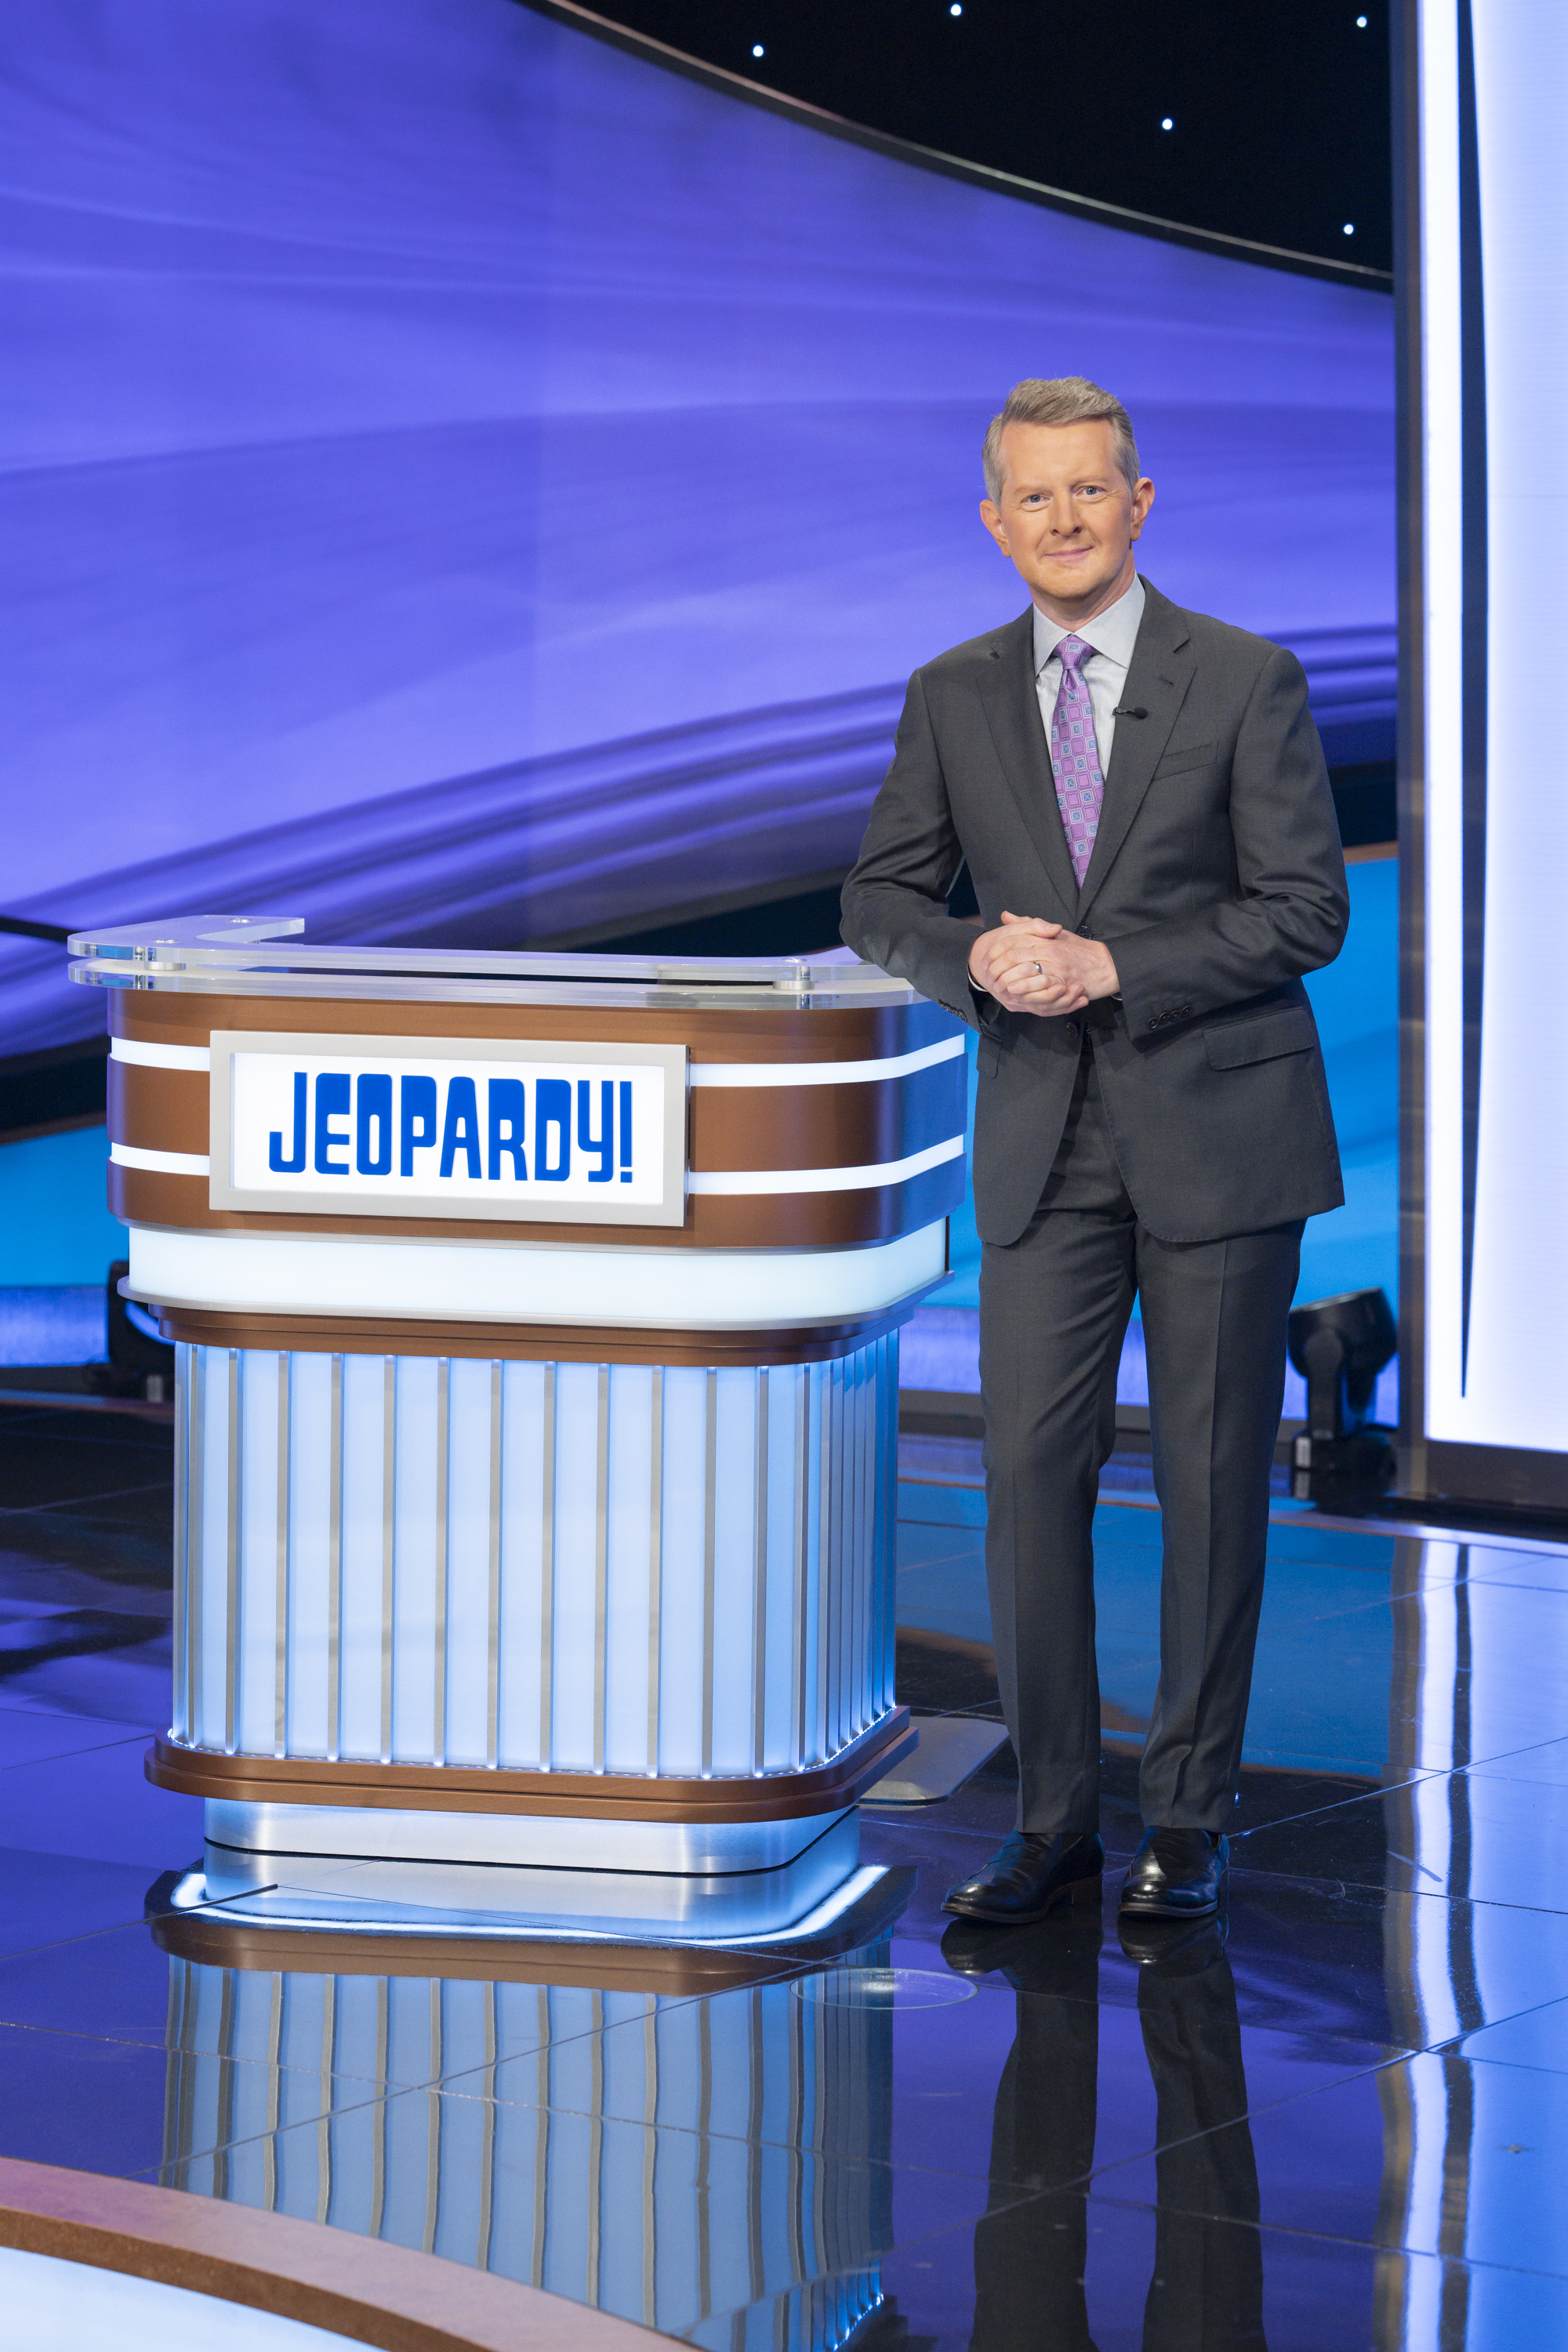 Former champ Ken Jennings hosts the nighty show and all other specials